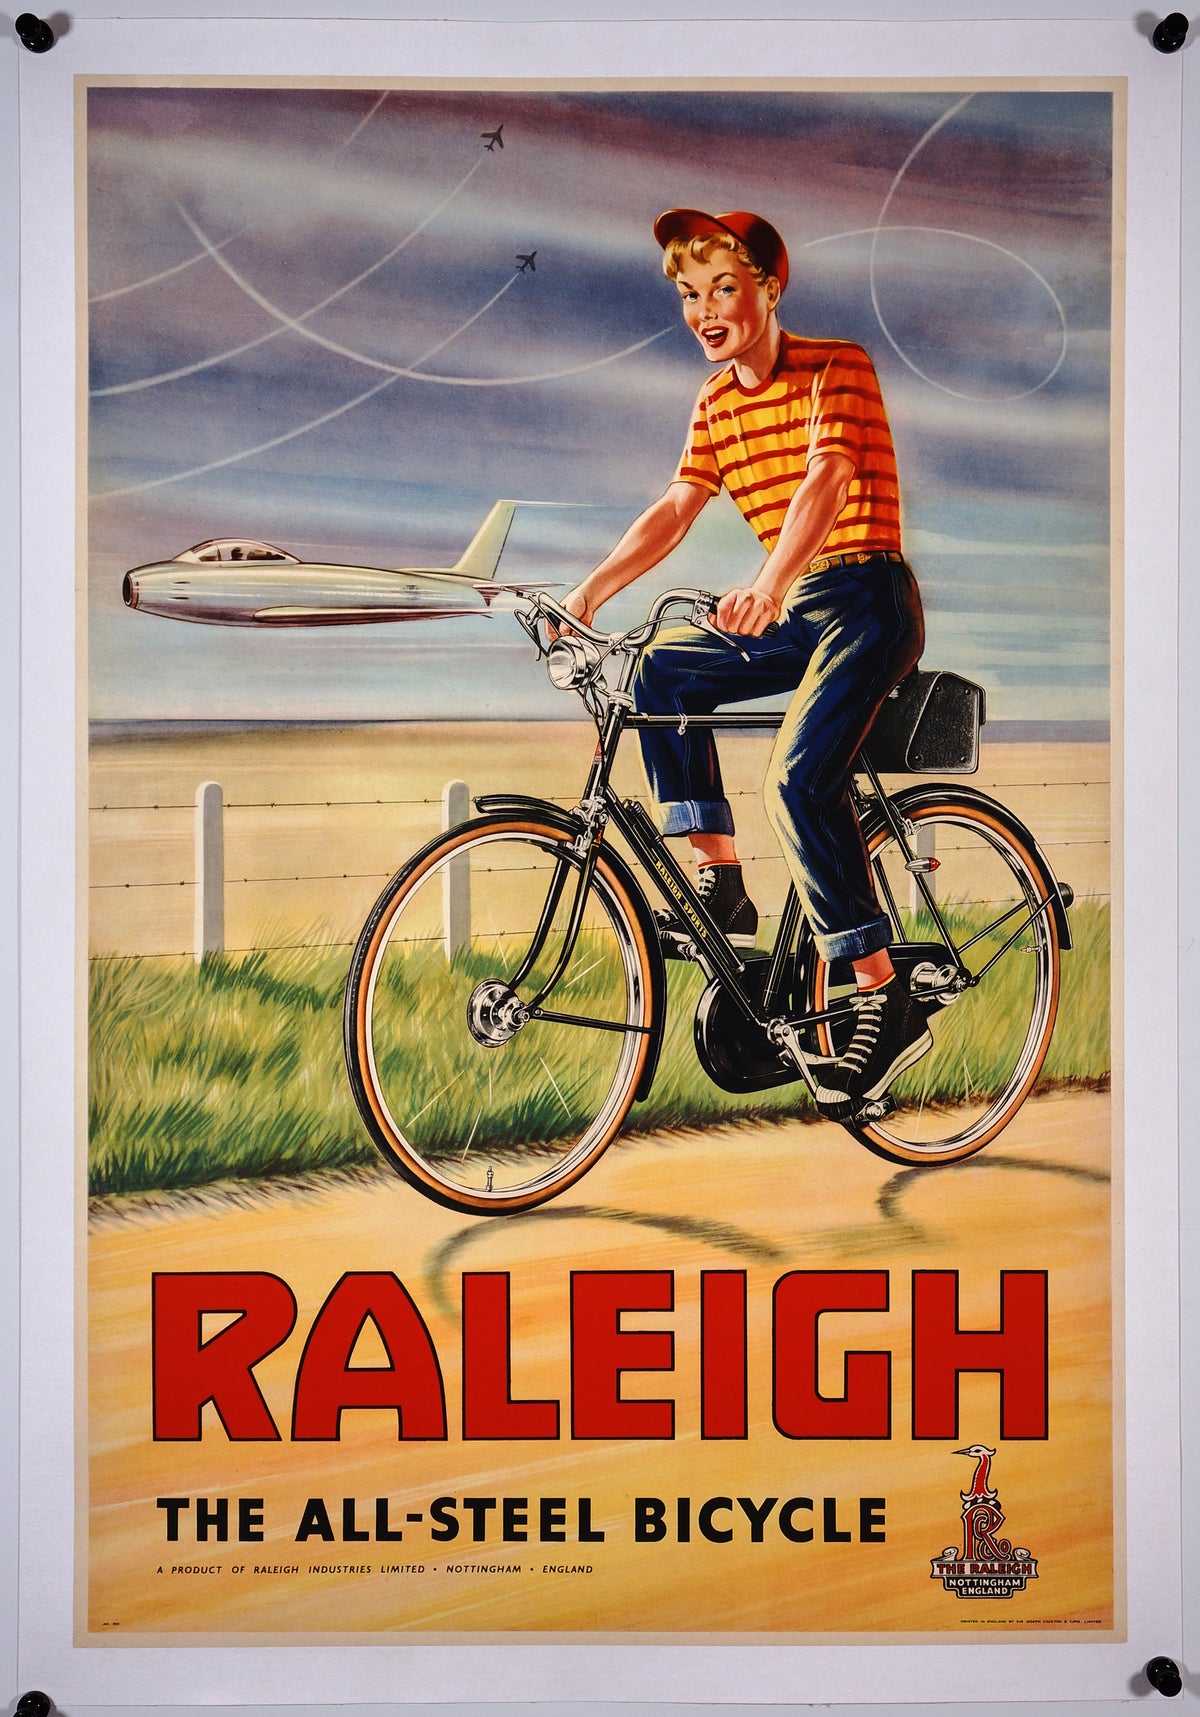 Raleigh the All-Steel Bicycle - Authentic Vintage Poster